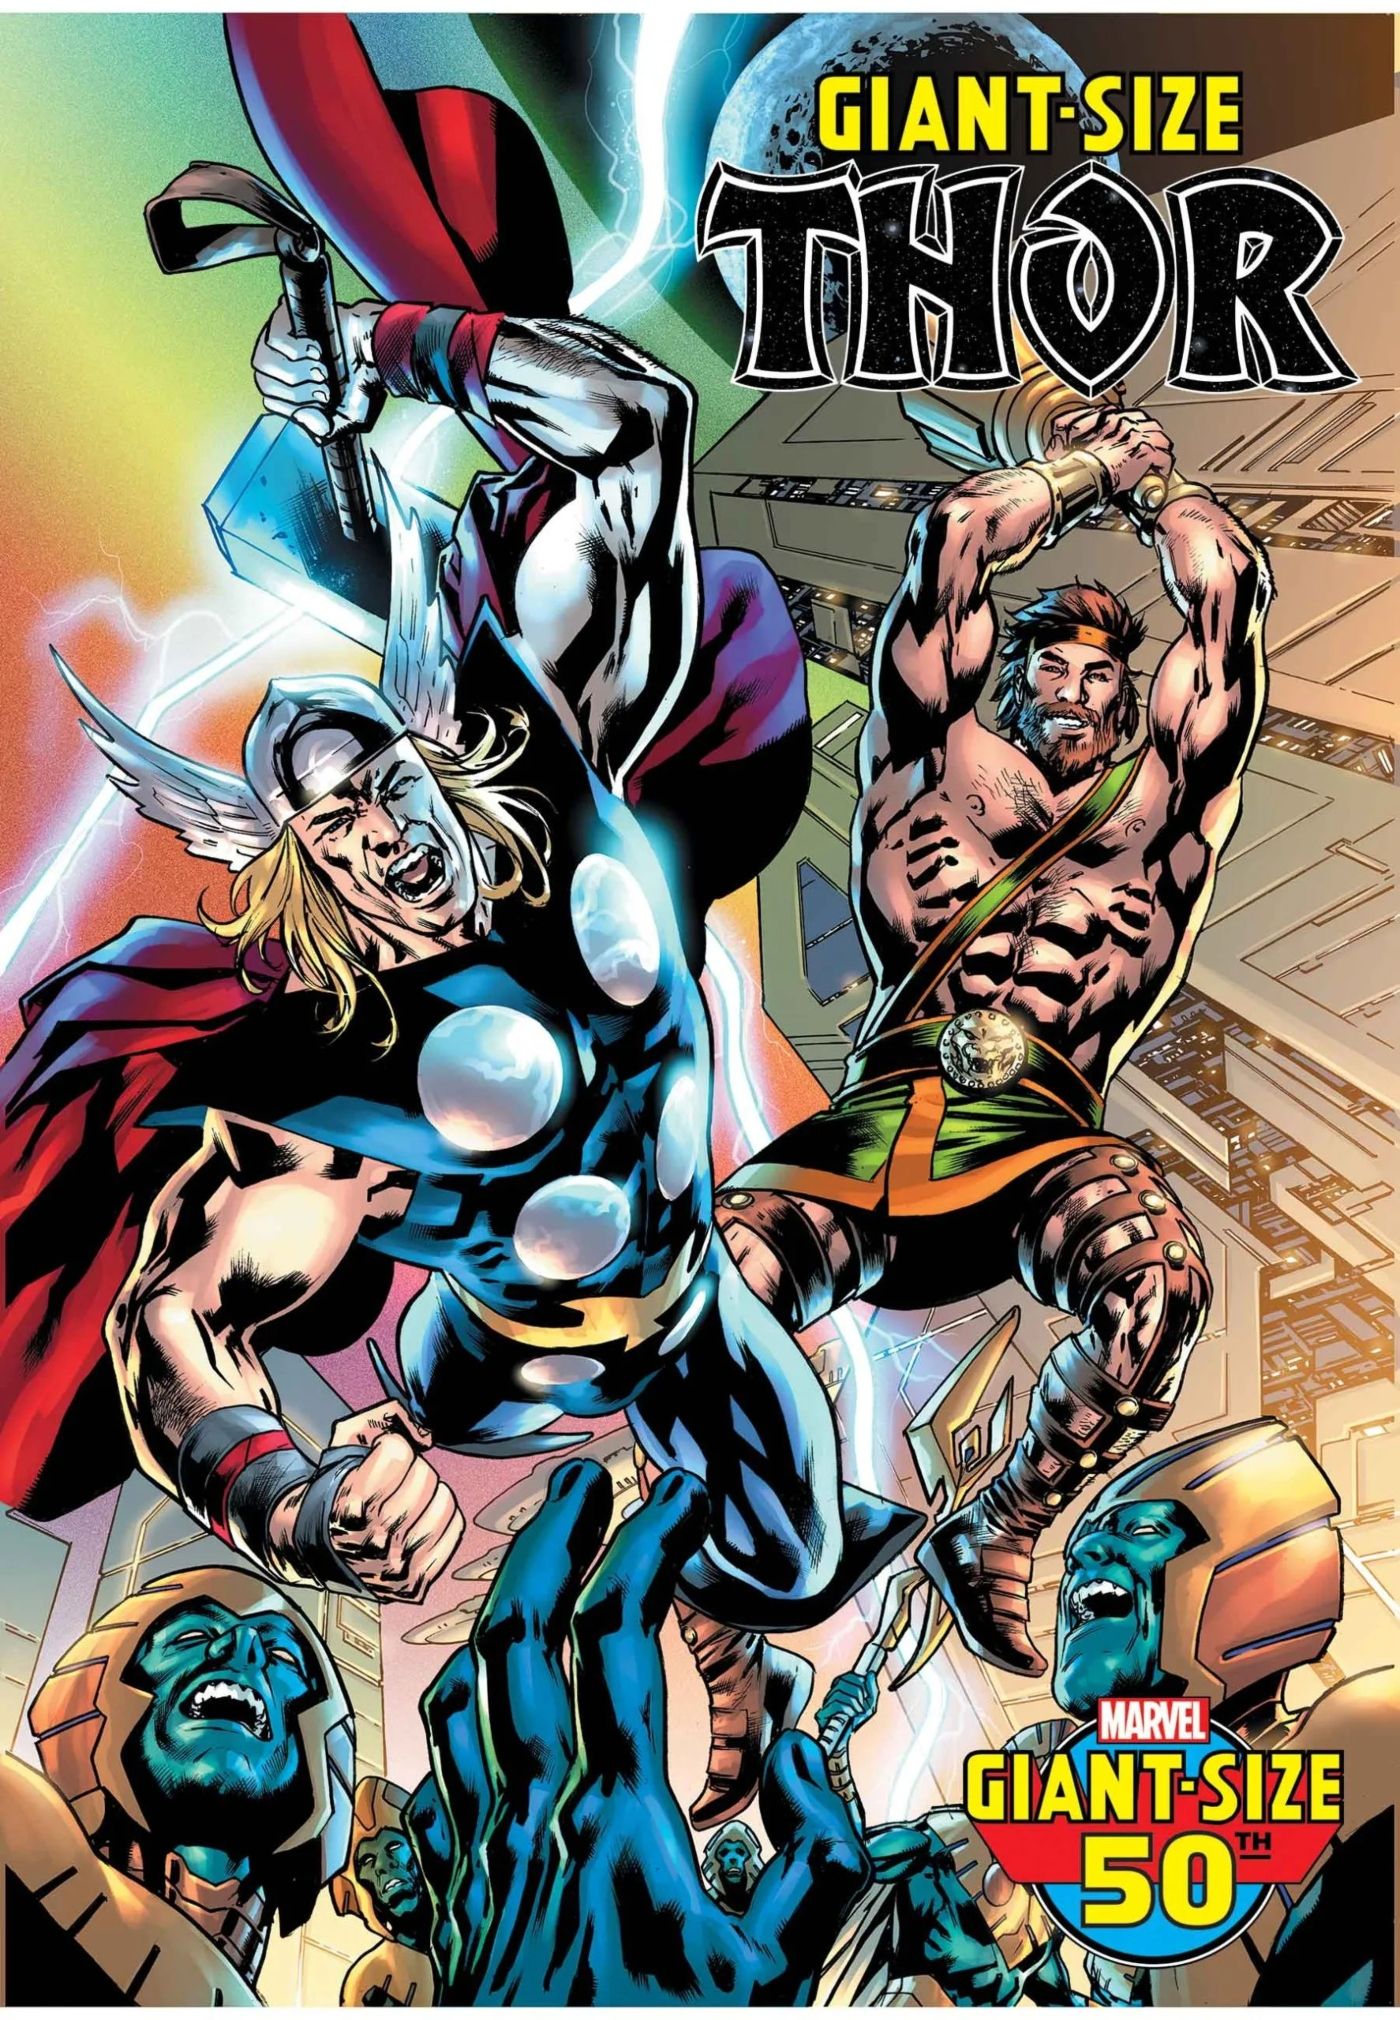 Main Marvel Comics cover for Giant-Size Thor #1.